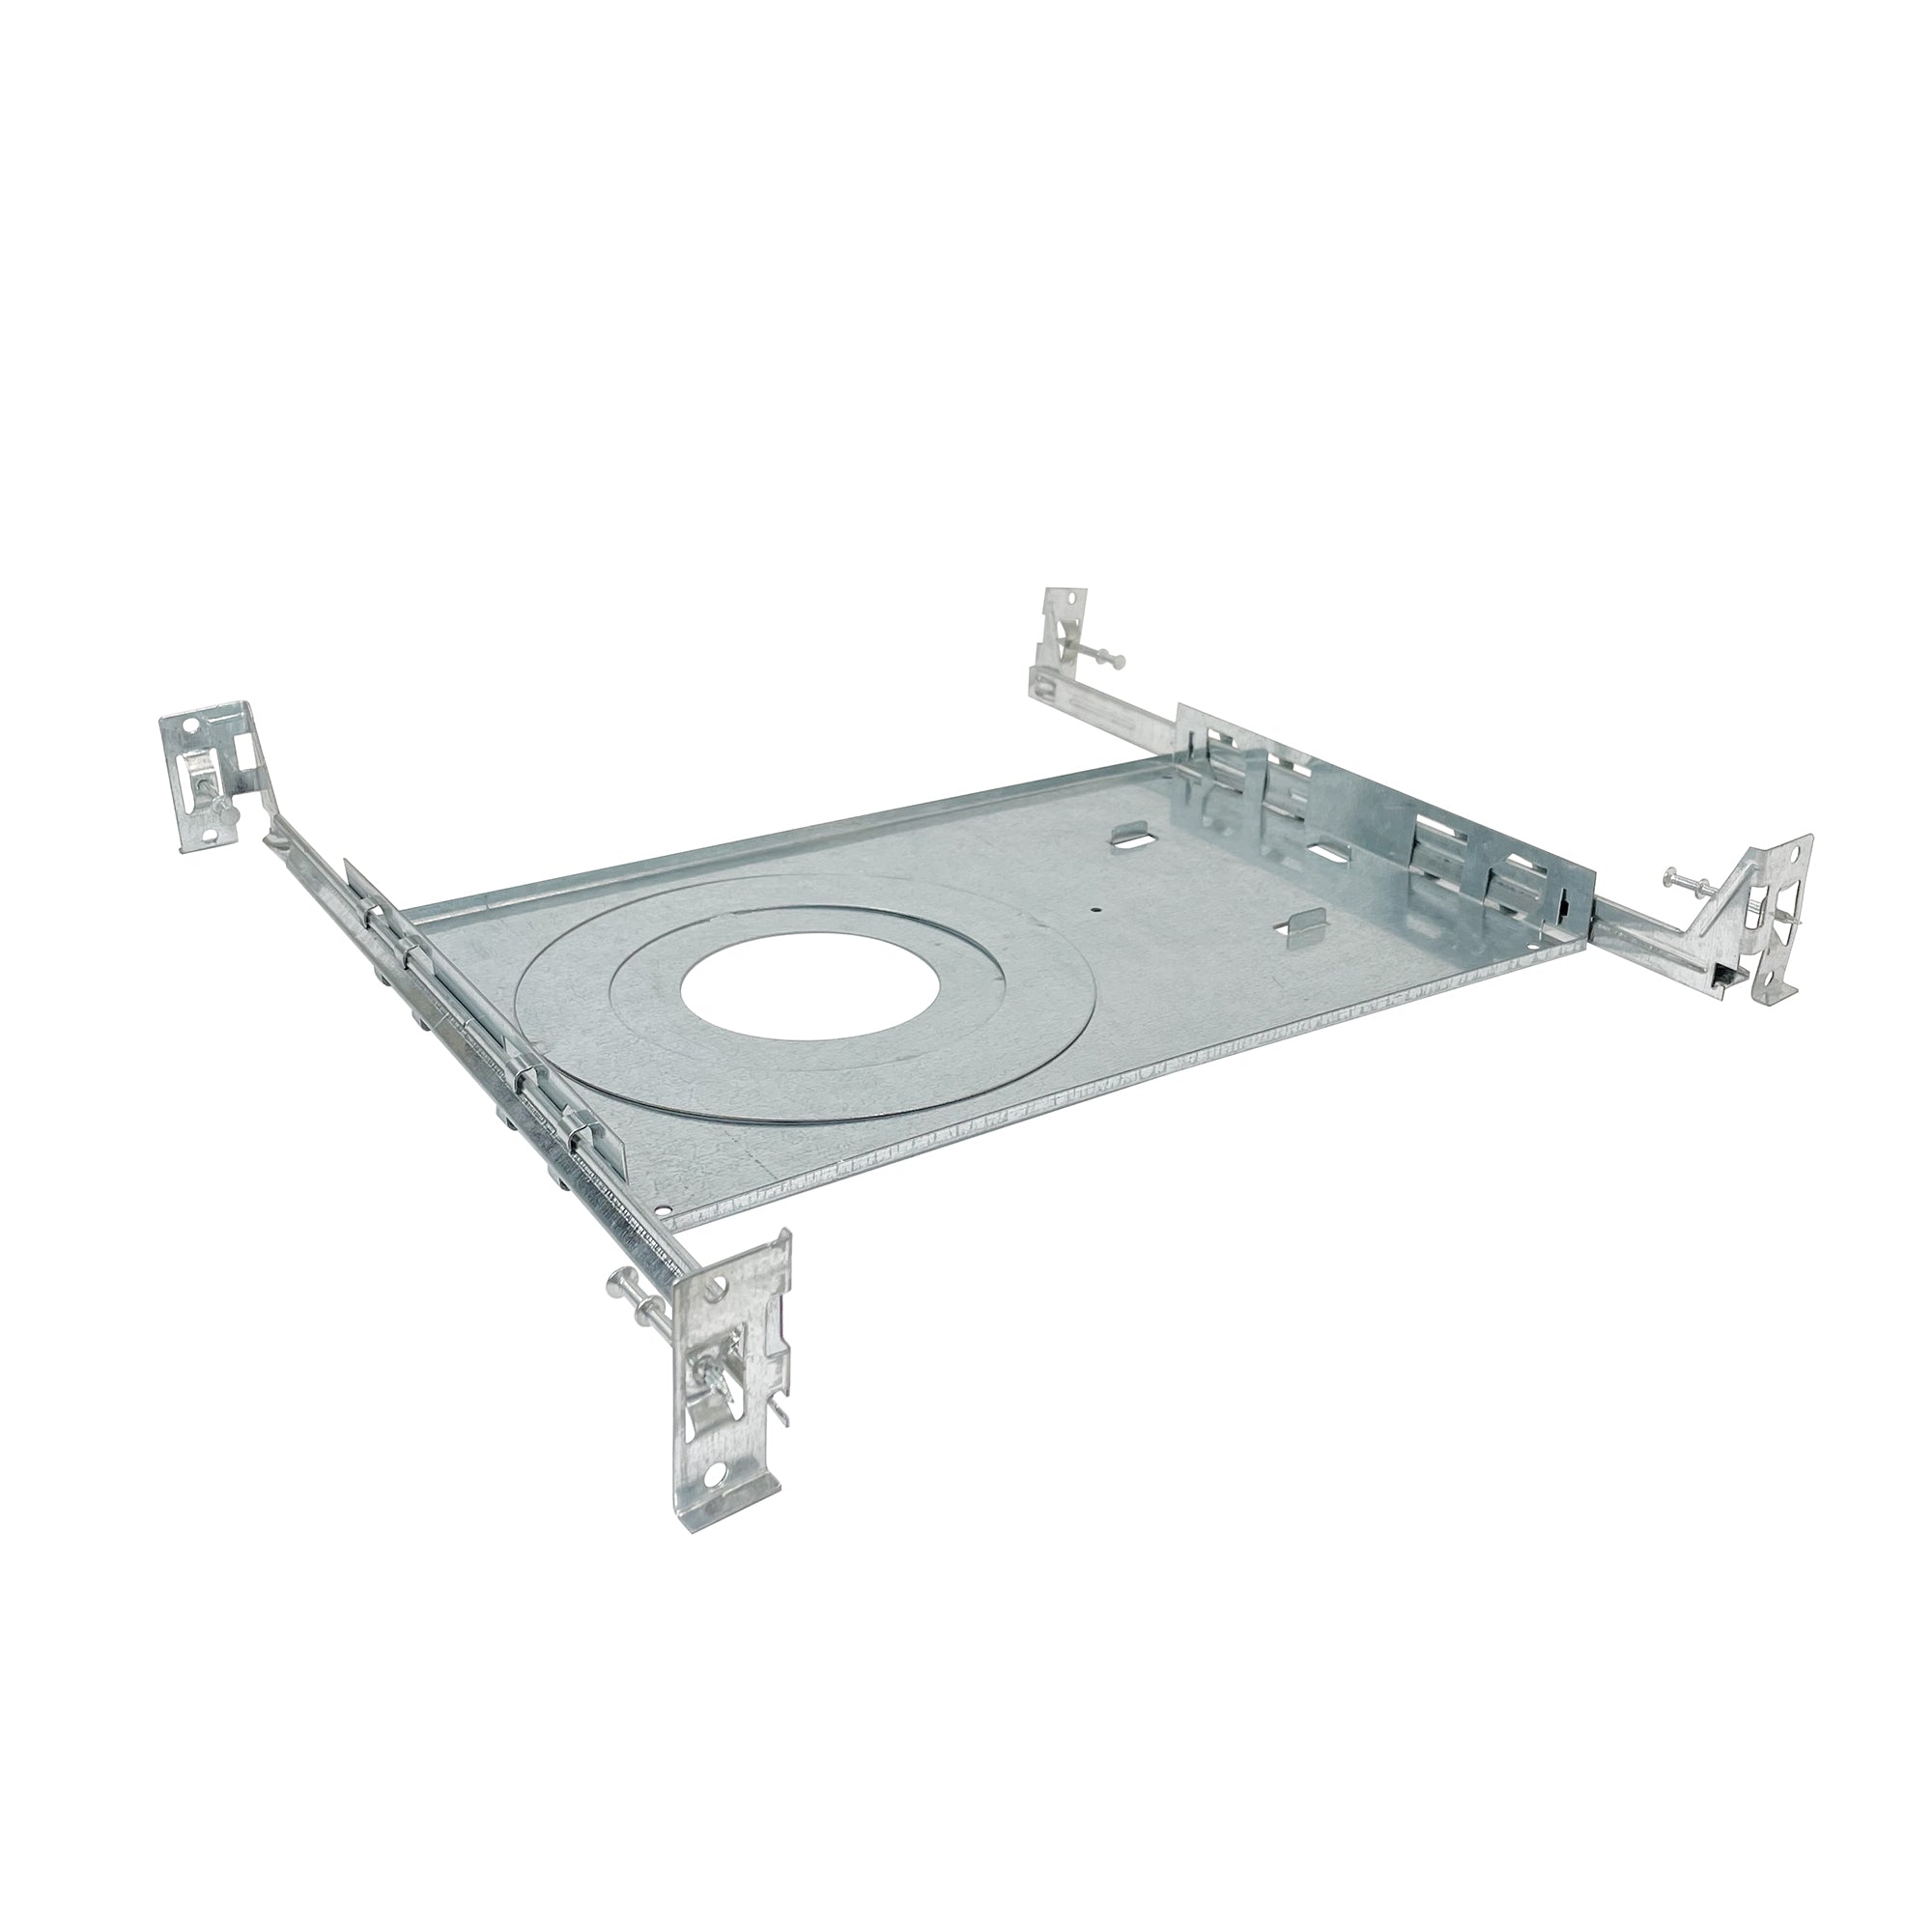 Nora Lighting NF-R246 - Recessed - Universal New Construction Frame-In for 2 Inch, 4 Inch and 6 Inch Can-less Downlights